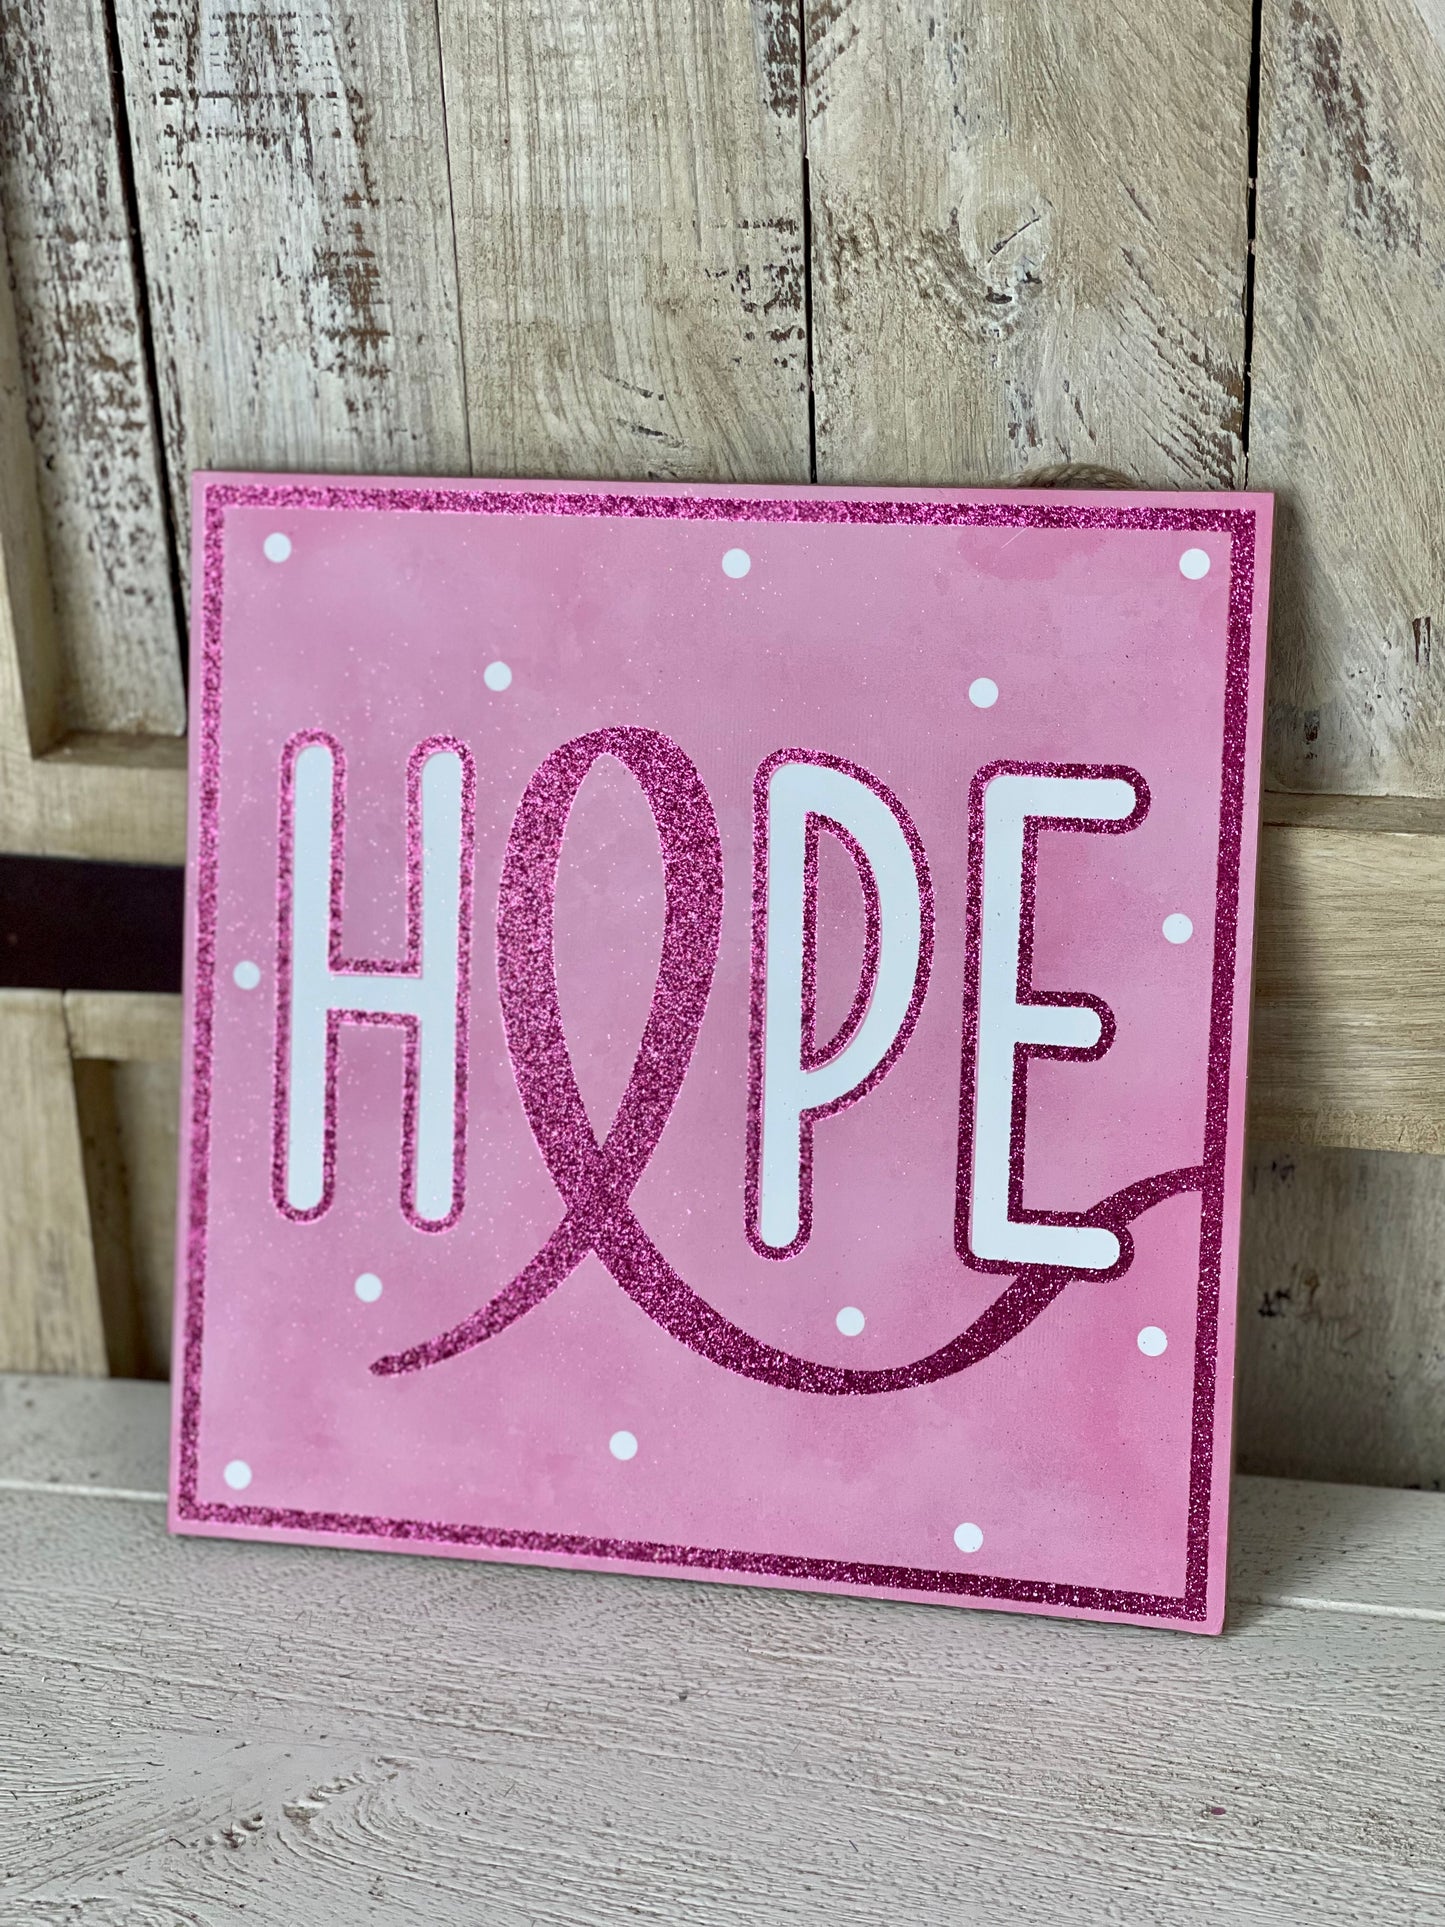 Hope Breast Cancer Wooden Sign